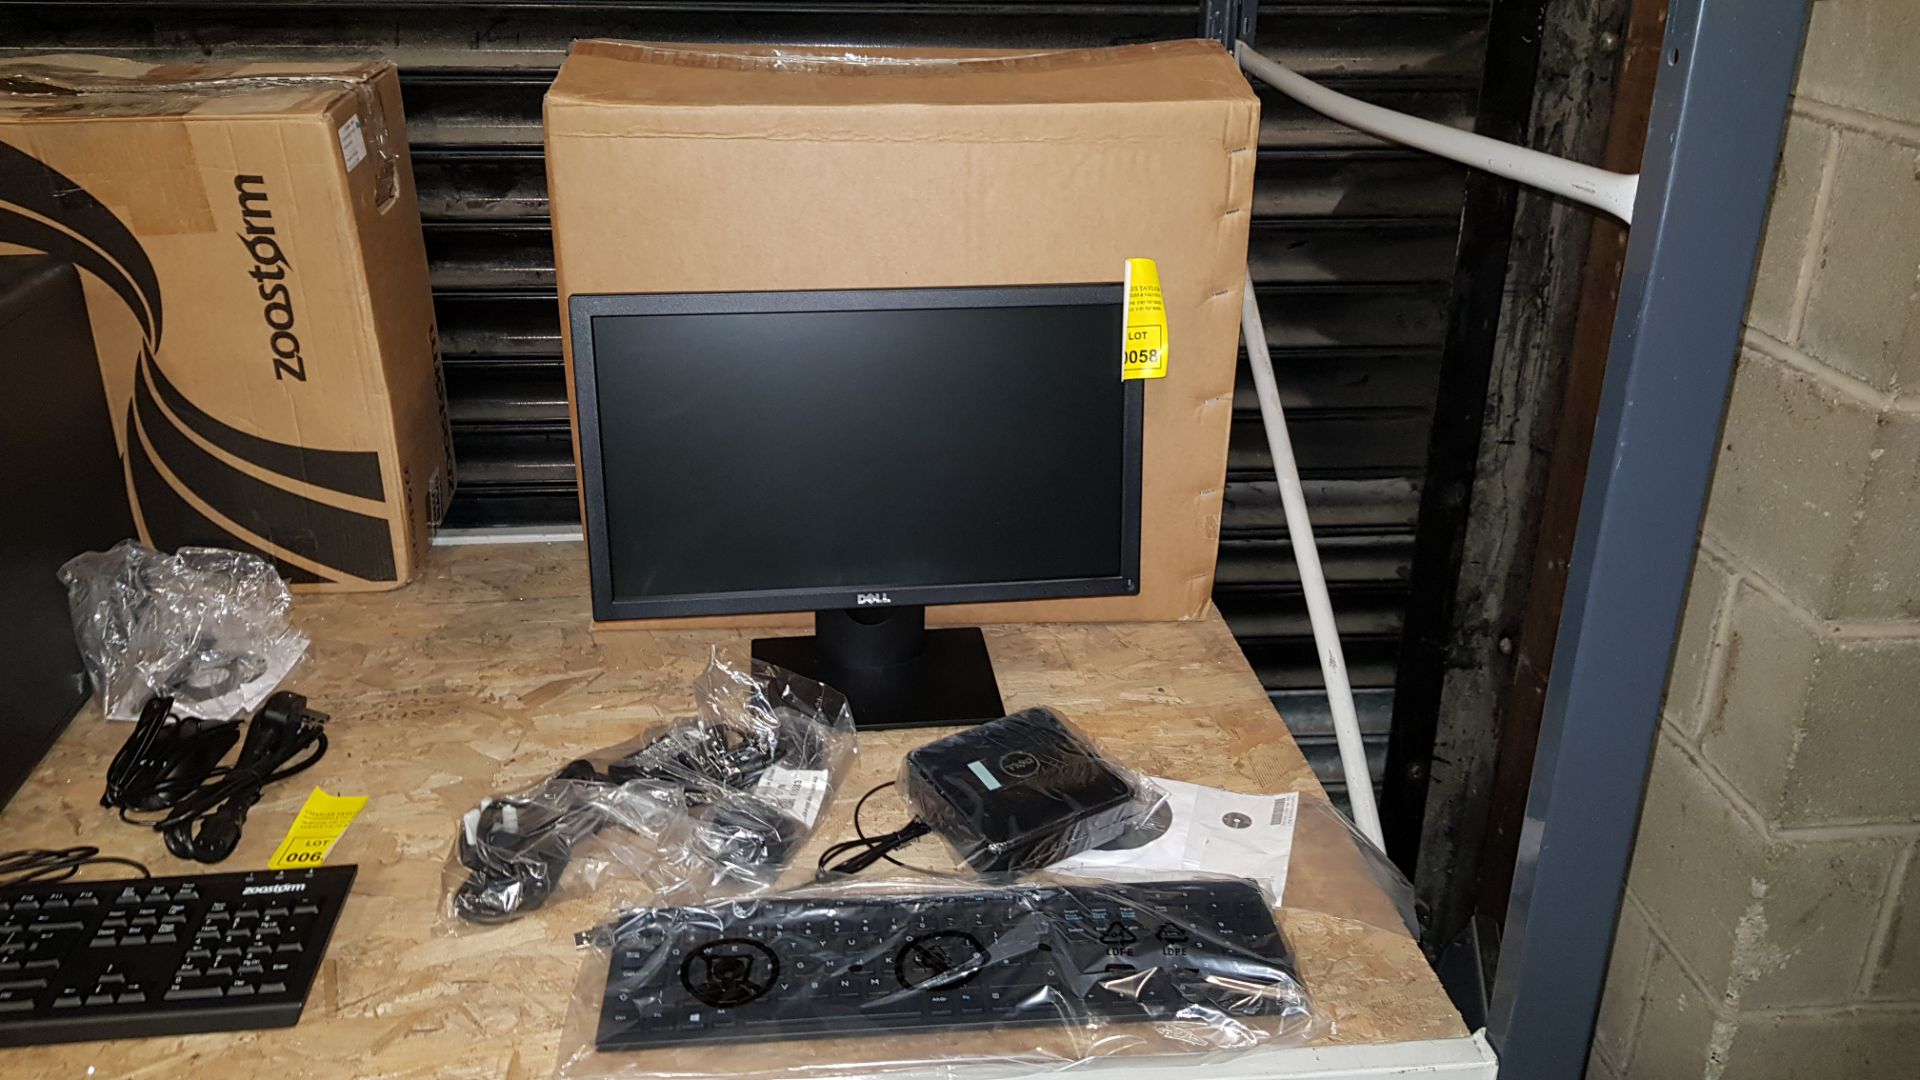 COMPUTER LOT CONTAINING DELL FLAT PANEL MONITOR, KEYBOARD,DELL PERSONAL COMPUTER MODEL D12U, ALL